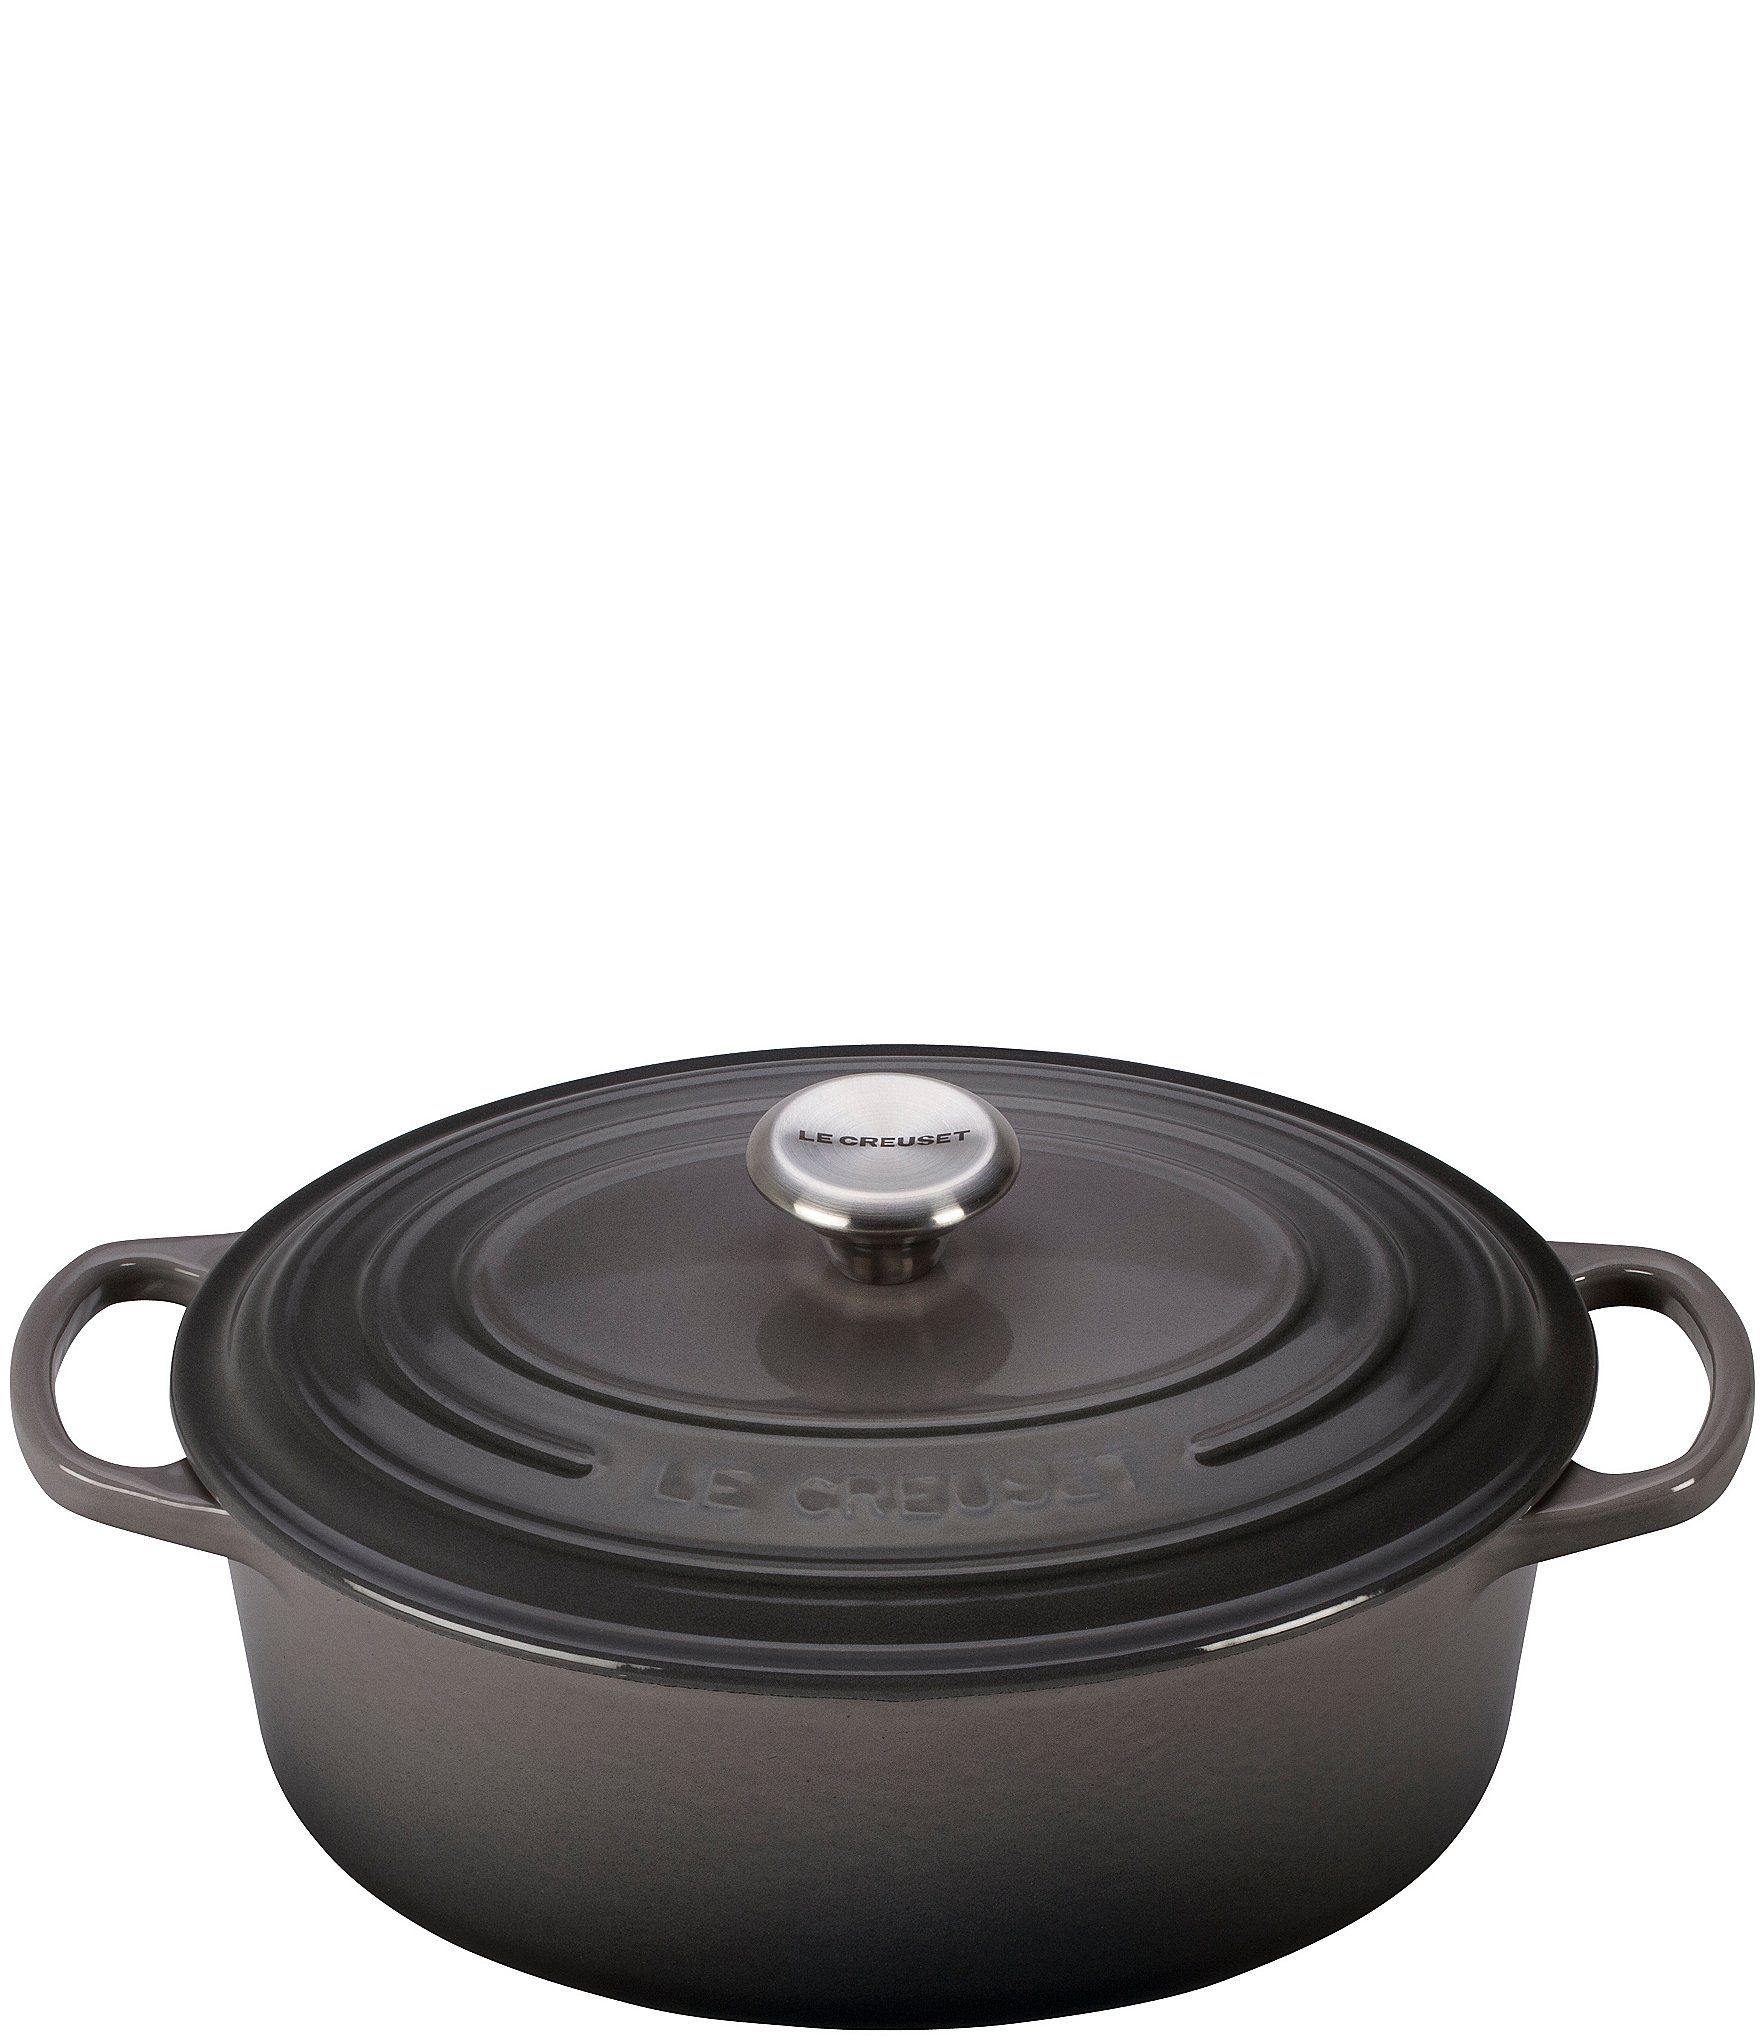 https://dimg.dillards.com/is/image/DillardsZoom/zoom/le-creuset-signature-2.75-quart-oval-enameled-cast-iron-dutch-oven-with-stainless-steel-knob/00000000_zi_97d24a28-bd52-47a6-b753-64aaf5b46b8a.jpg